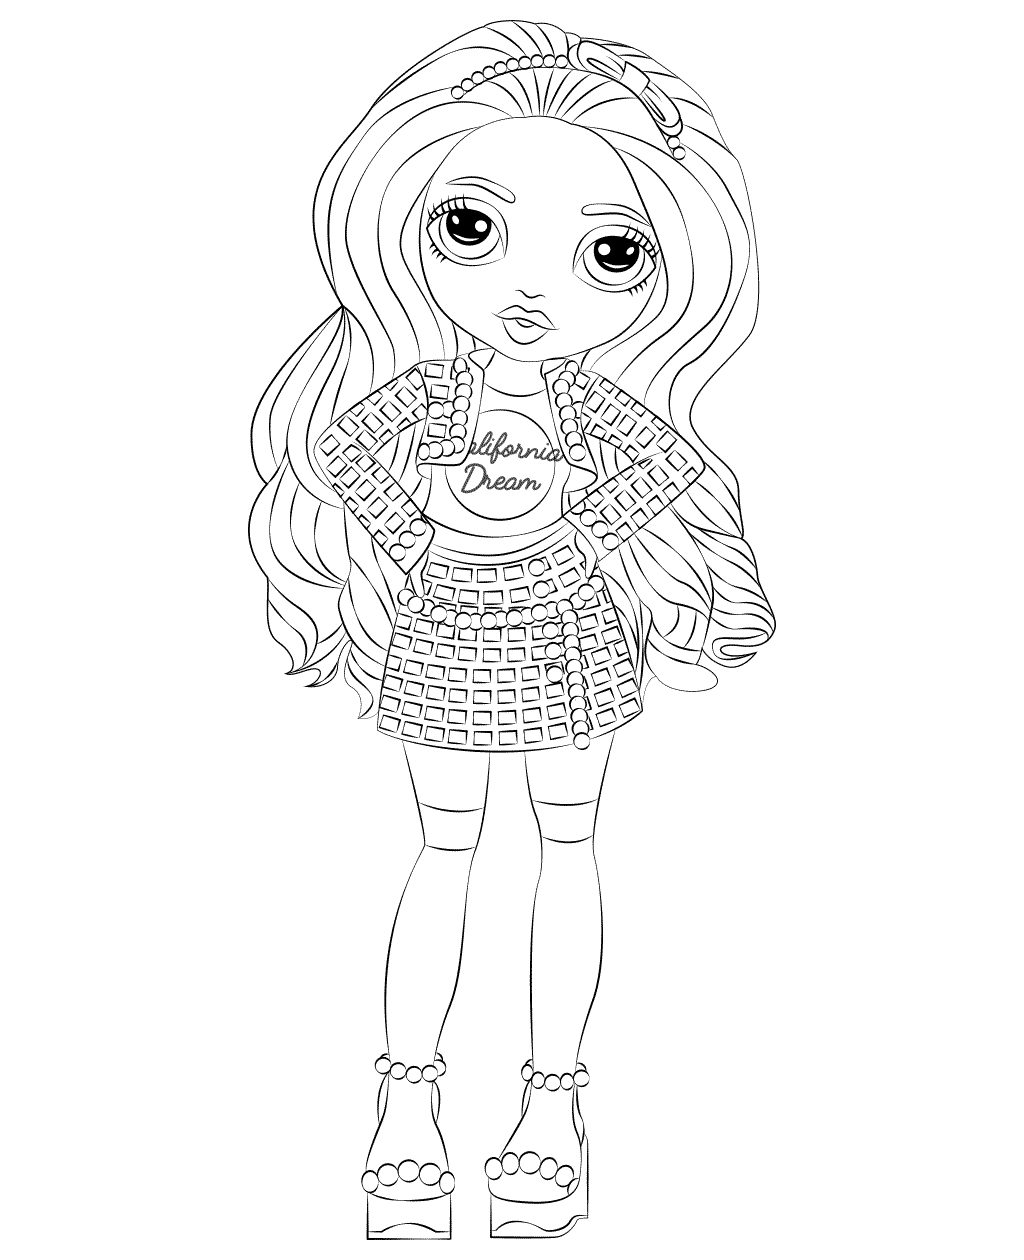 Rainbow High Coloring Pages PDF Printable - Coloring Pages Rainbow High